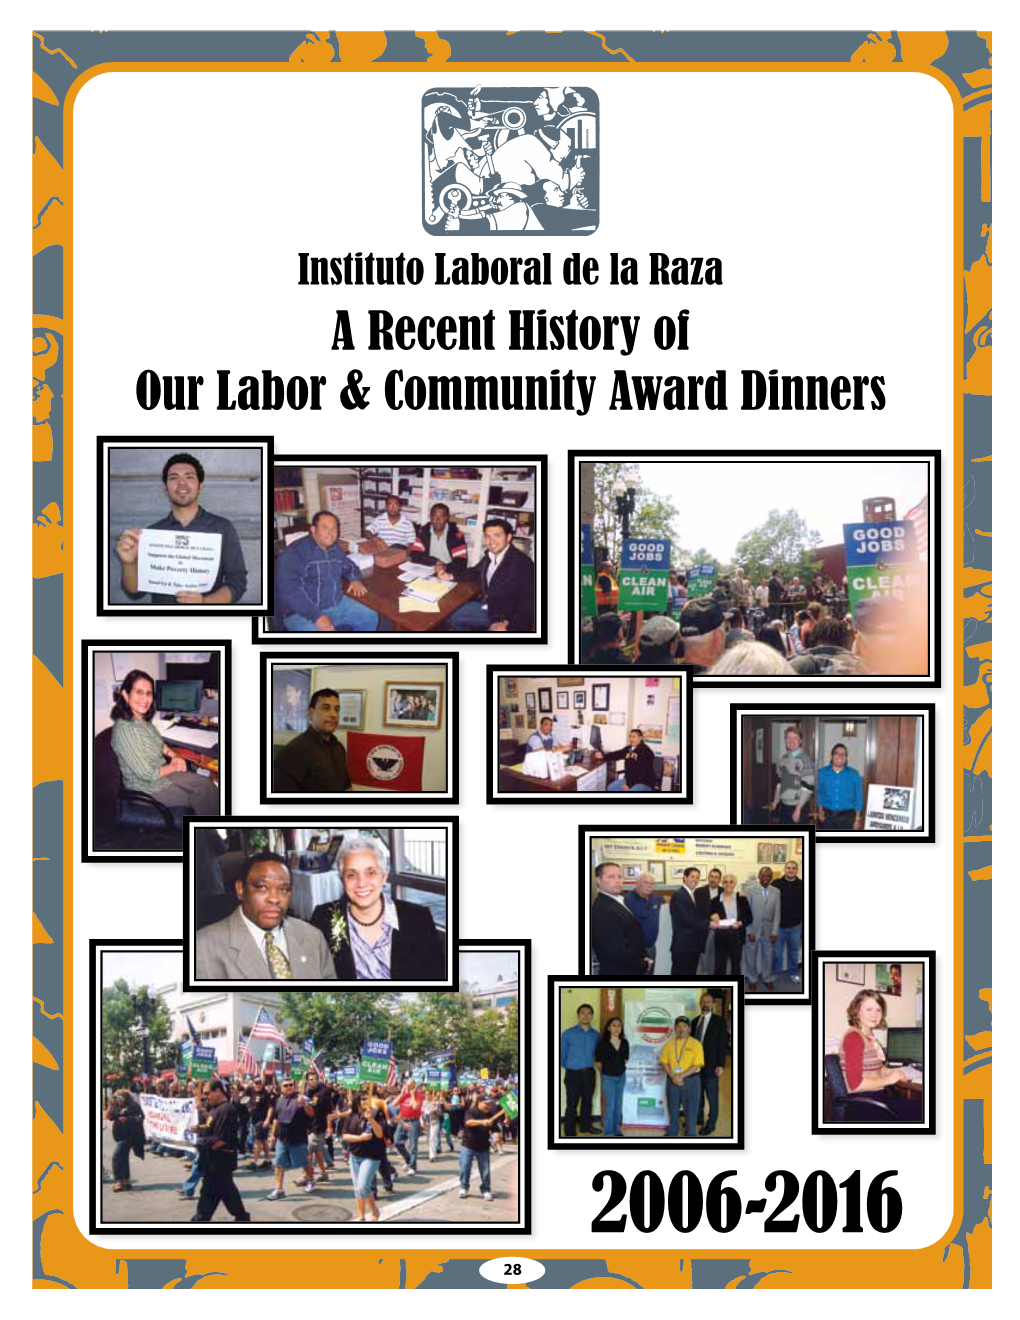 A Recent History of Our Labor & Community Award Dinners